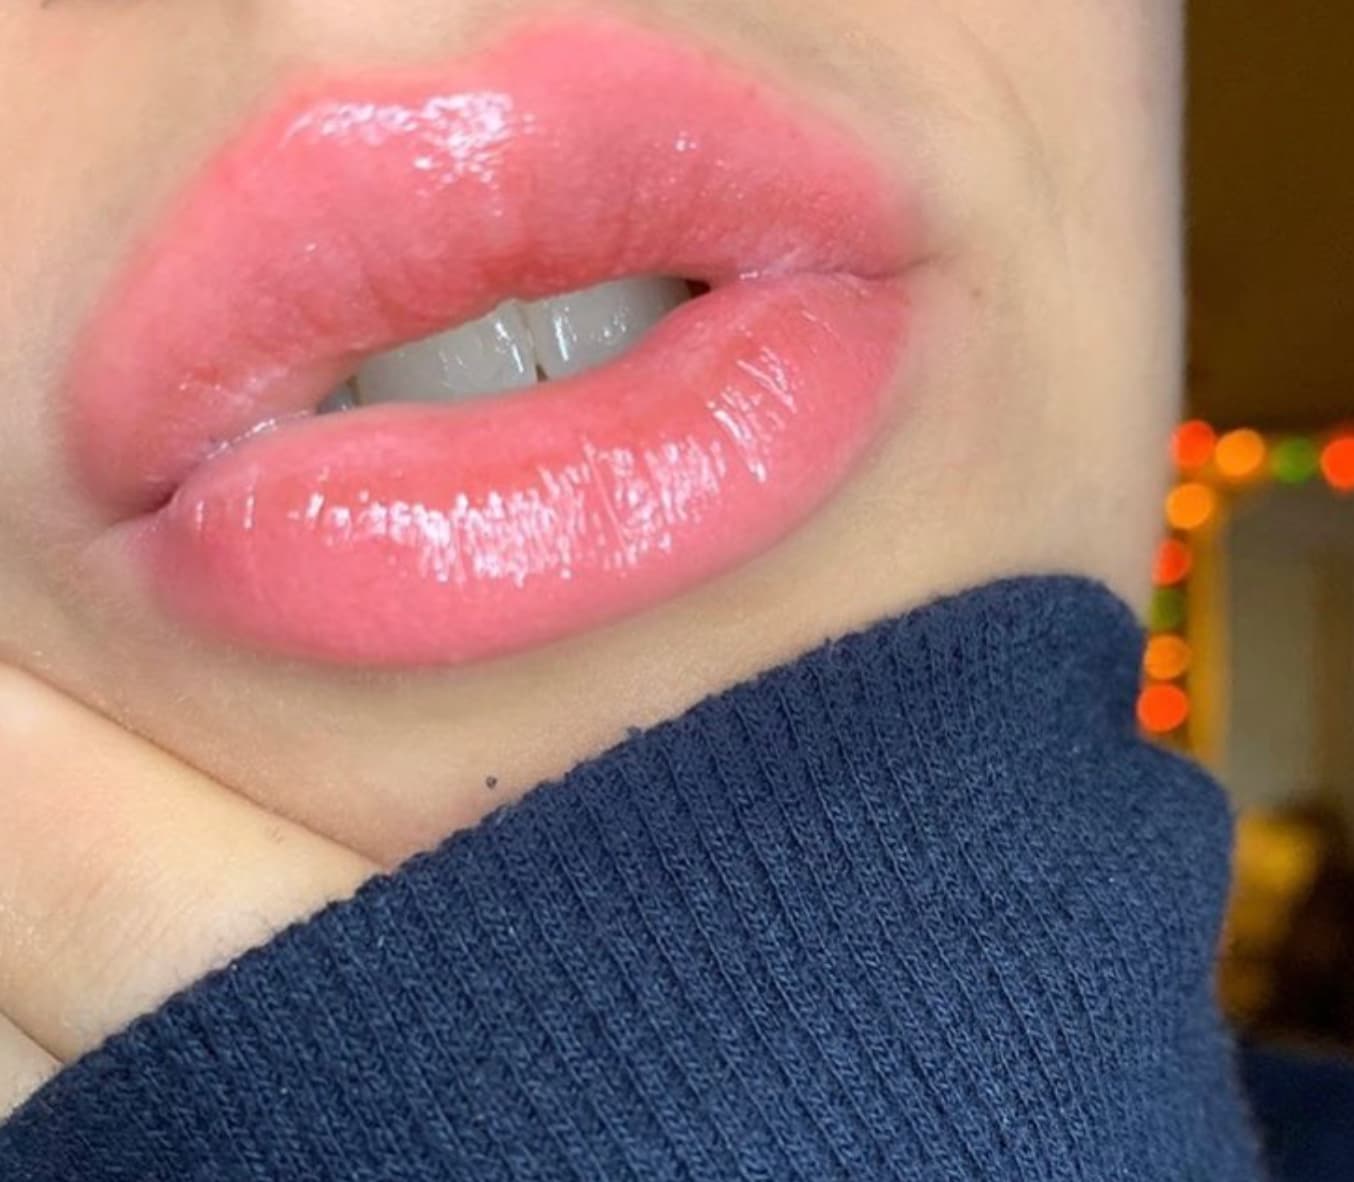 Lip Blush Tattoos: Everything You Need to Know | Female Tattooers